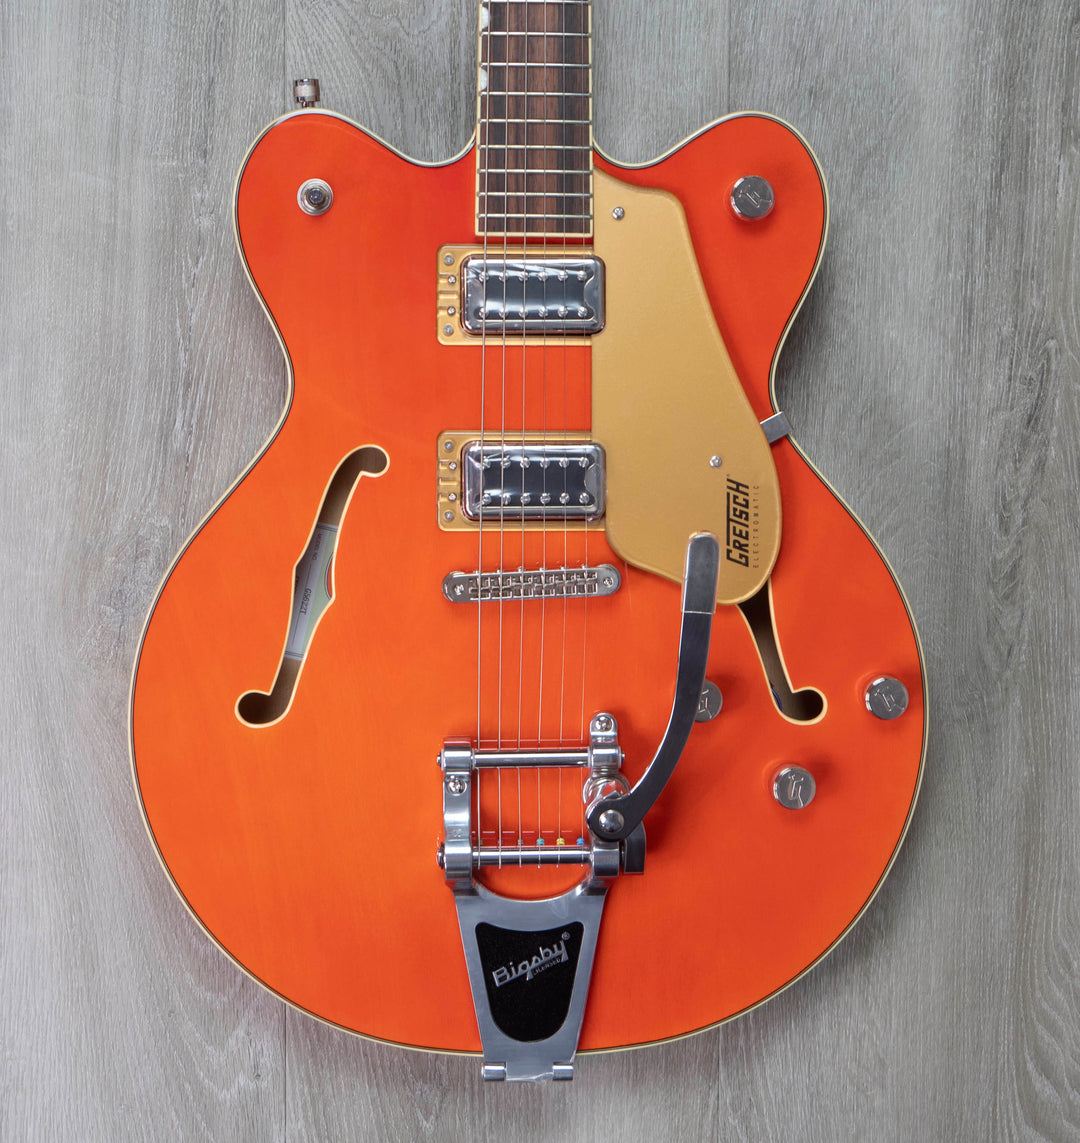 Gretsch G5622T Electromatic Center Block Double-Cut with Bigsby, Laurel Fingerboard, Orange Stain